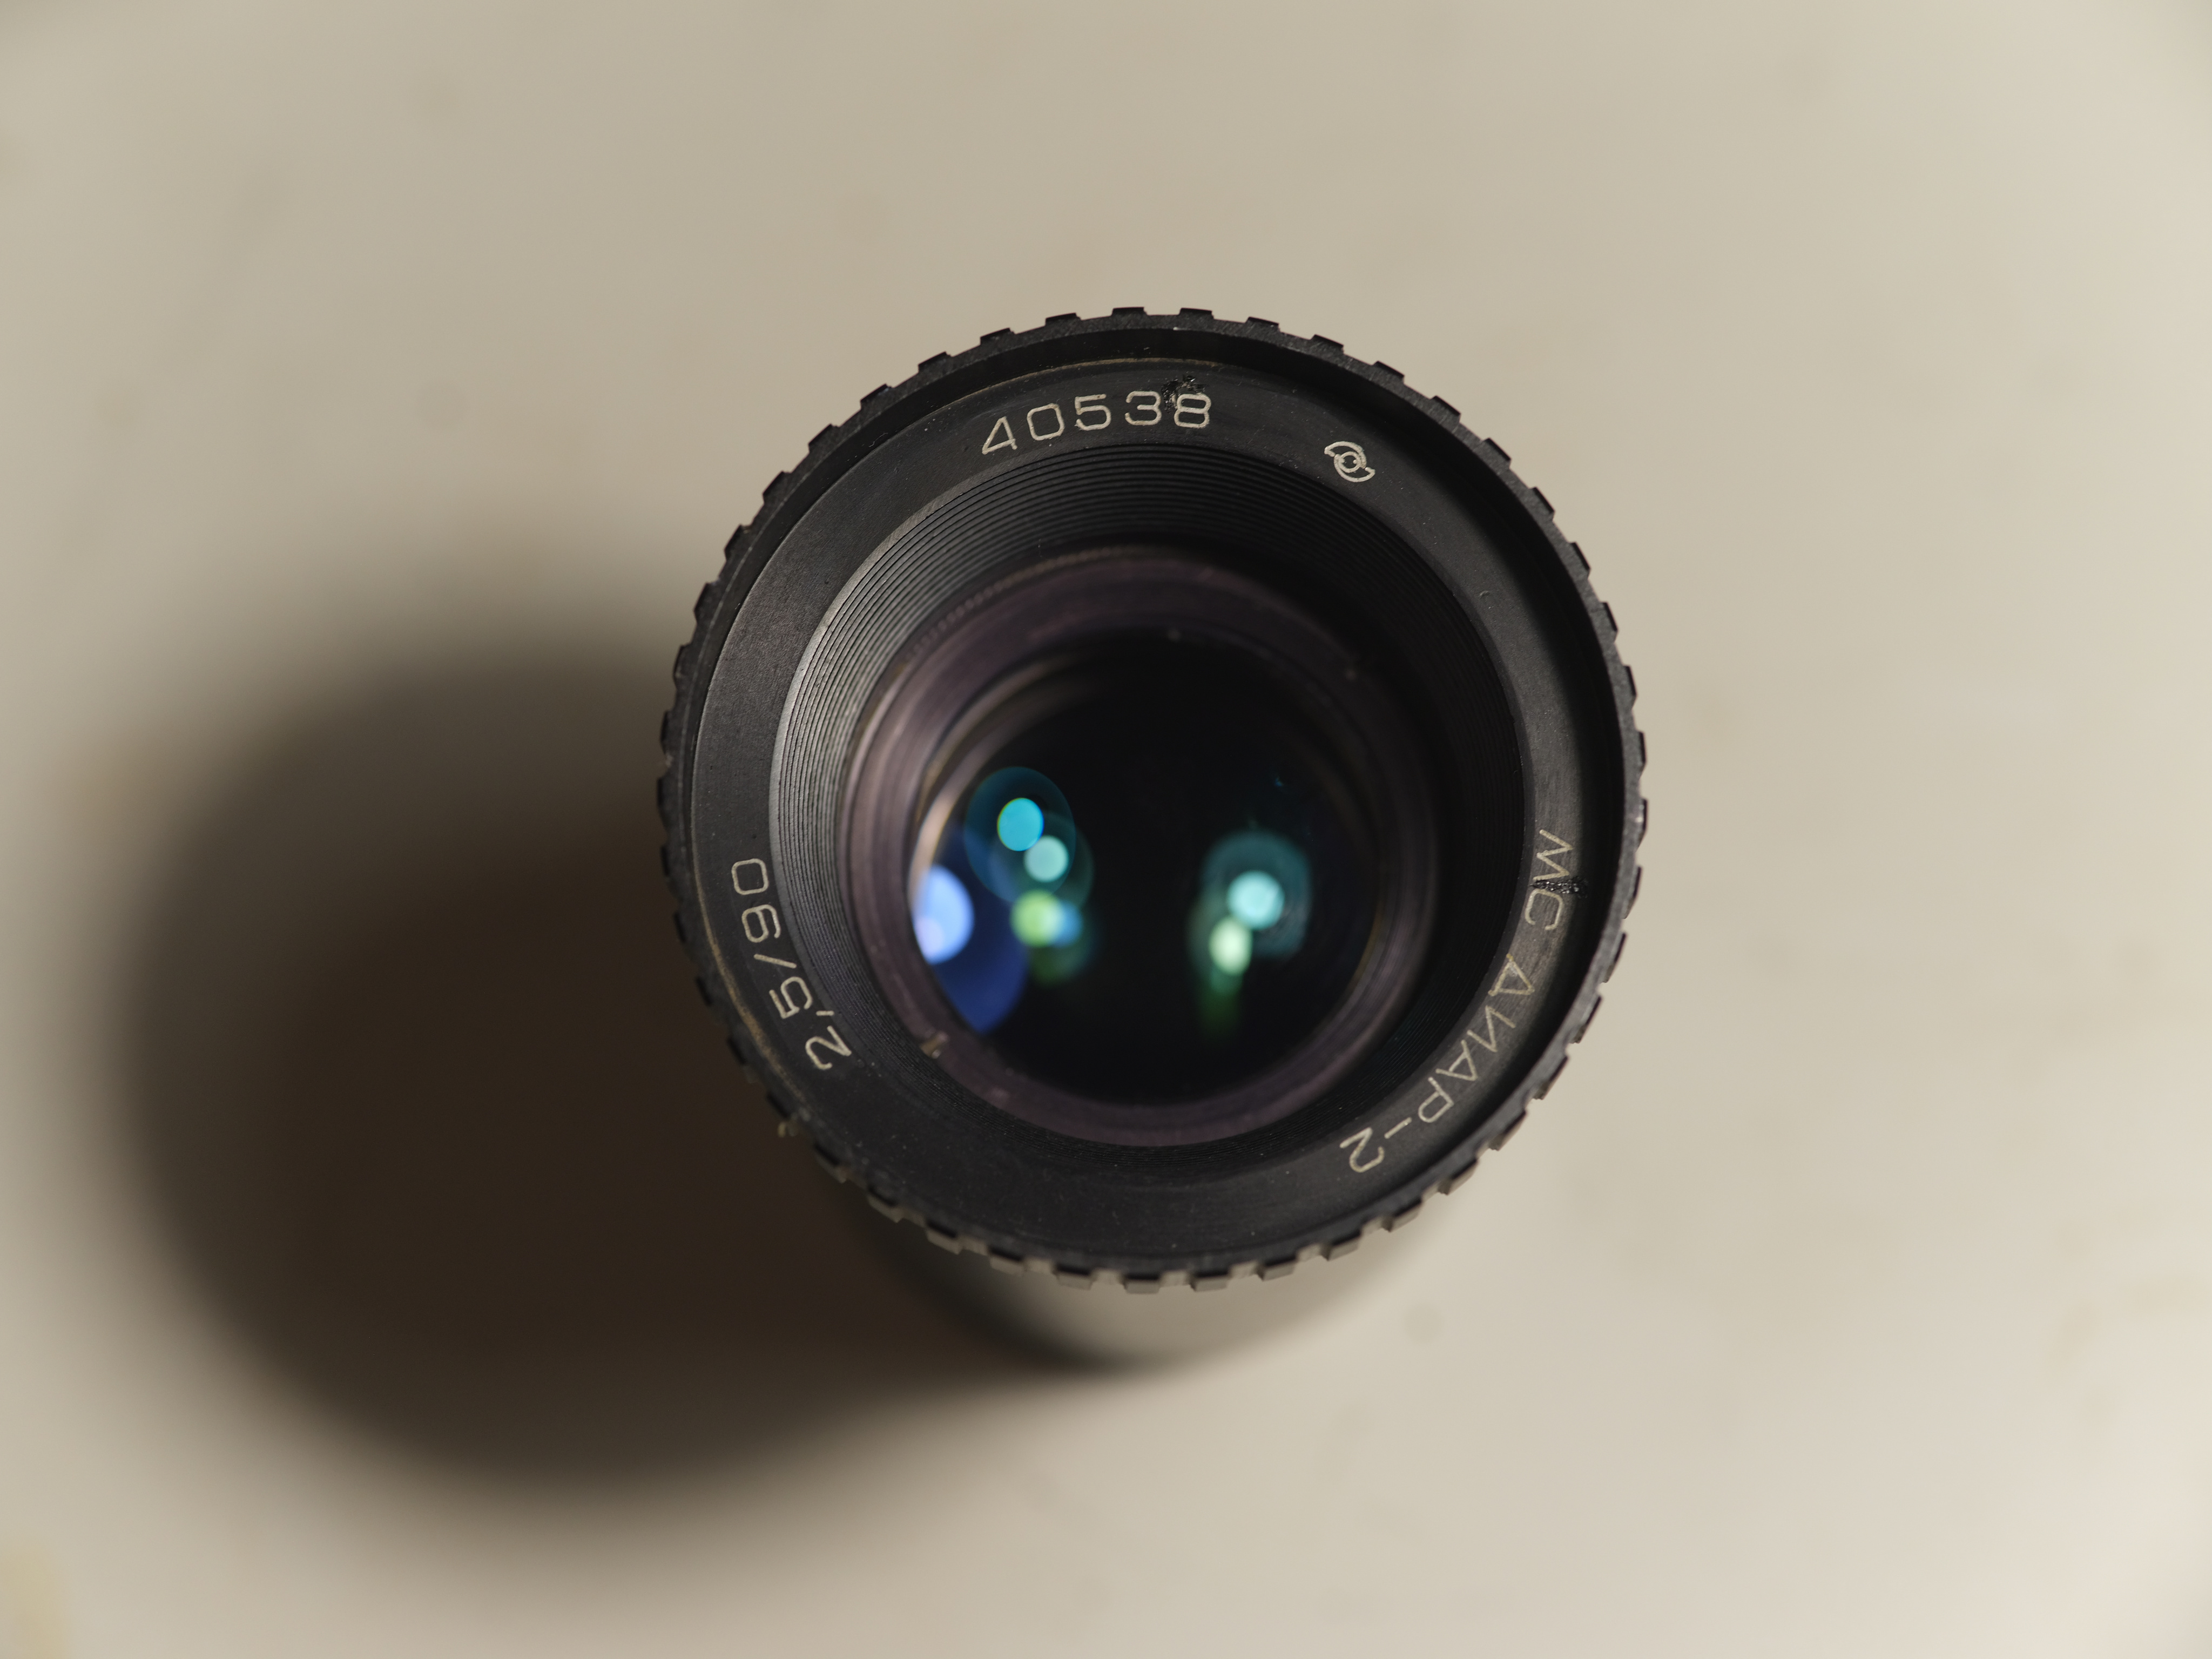 Photo of the MC Dear-2 lens with an intact lens block. Photo provided by Andrey Andreev